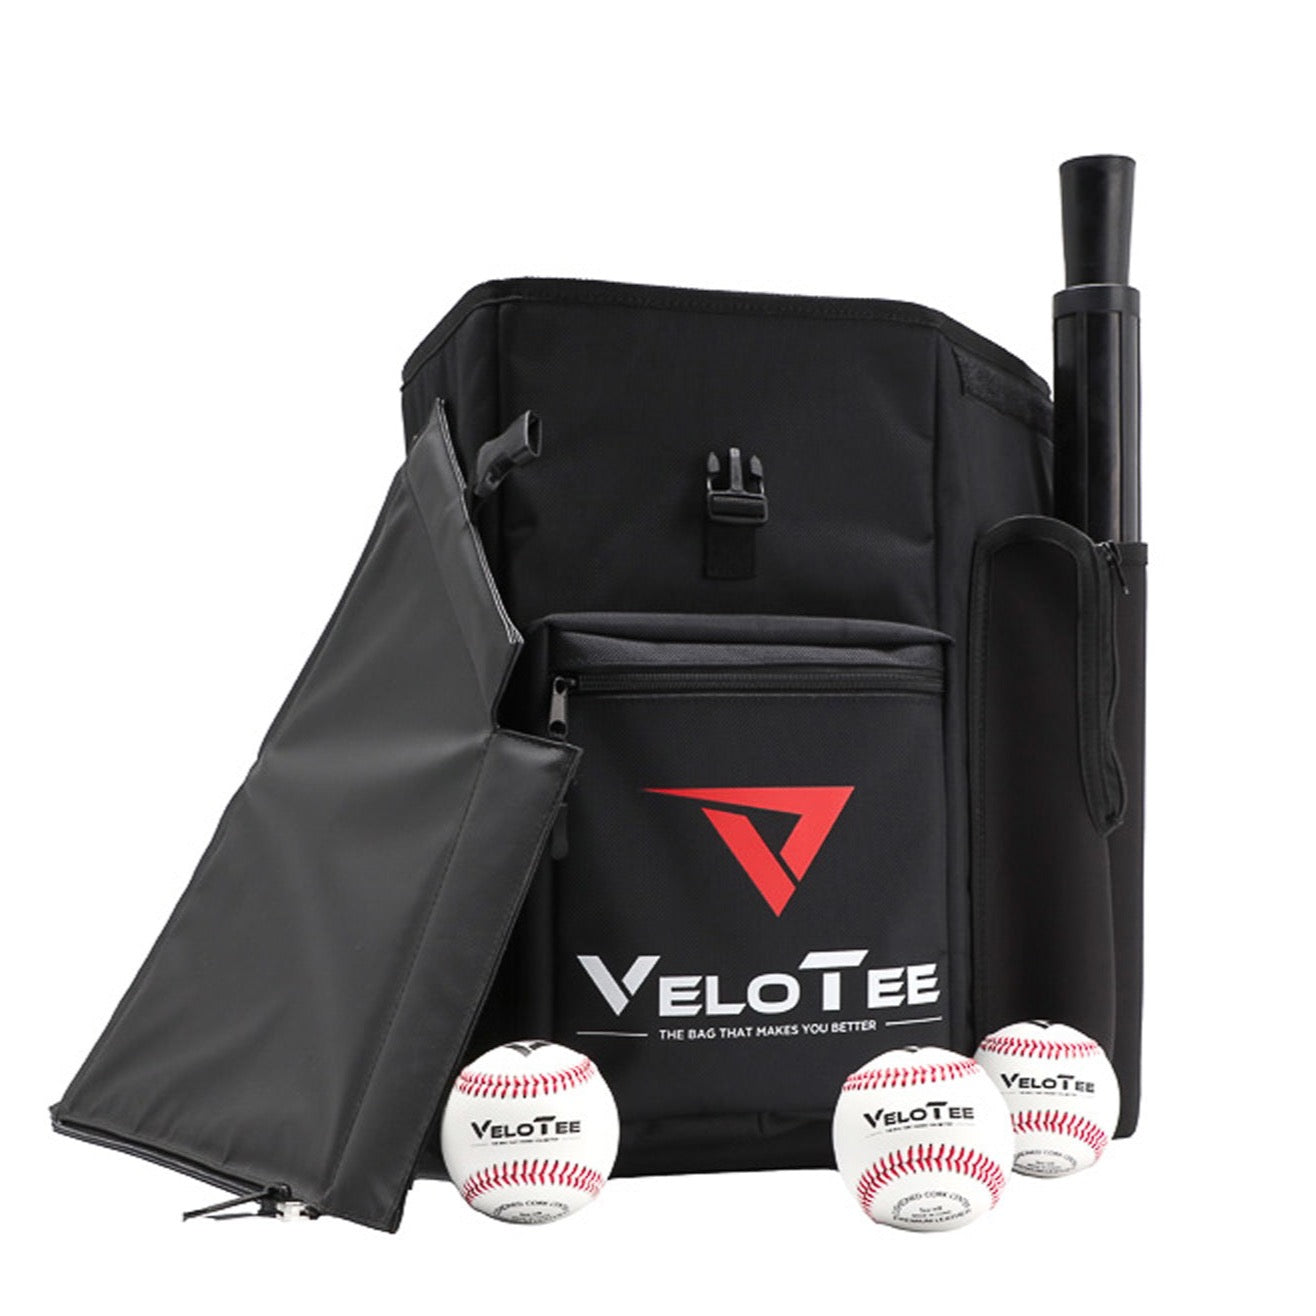 VeloTee's Baseball & Softball Bat Bag Backpack with Batting Tee has a removable home plate top. Baseball and Softball teams and travel team organizations can customize VeloTee's removable home plate top to show their teams logo and players name and number.